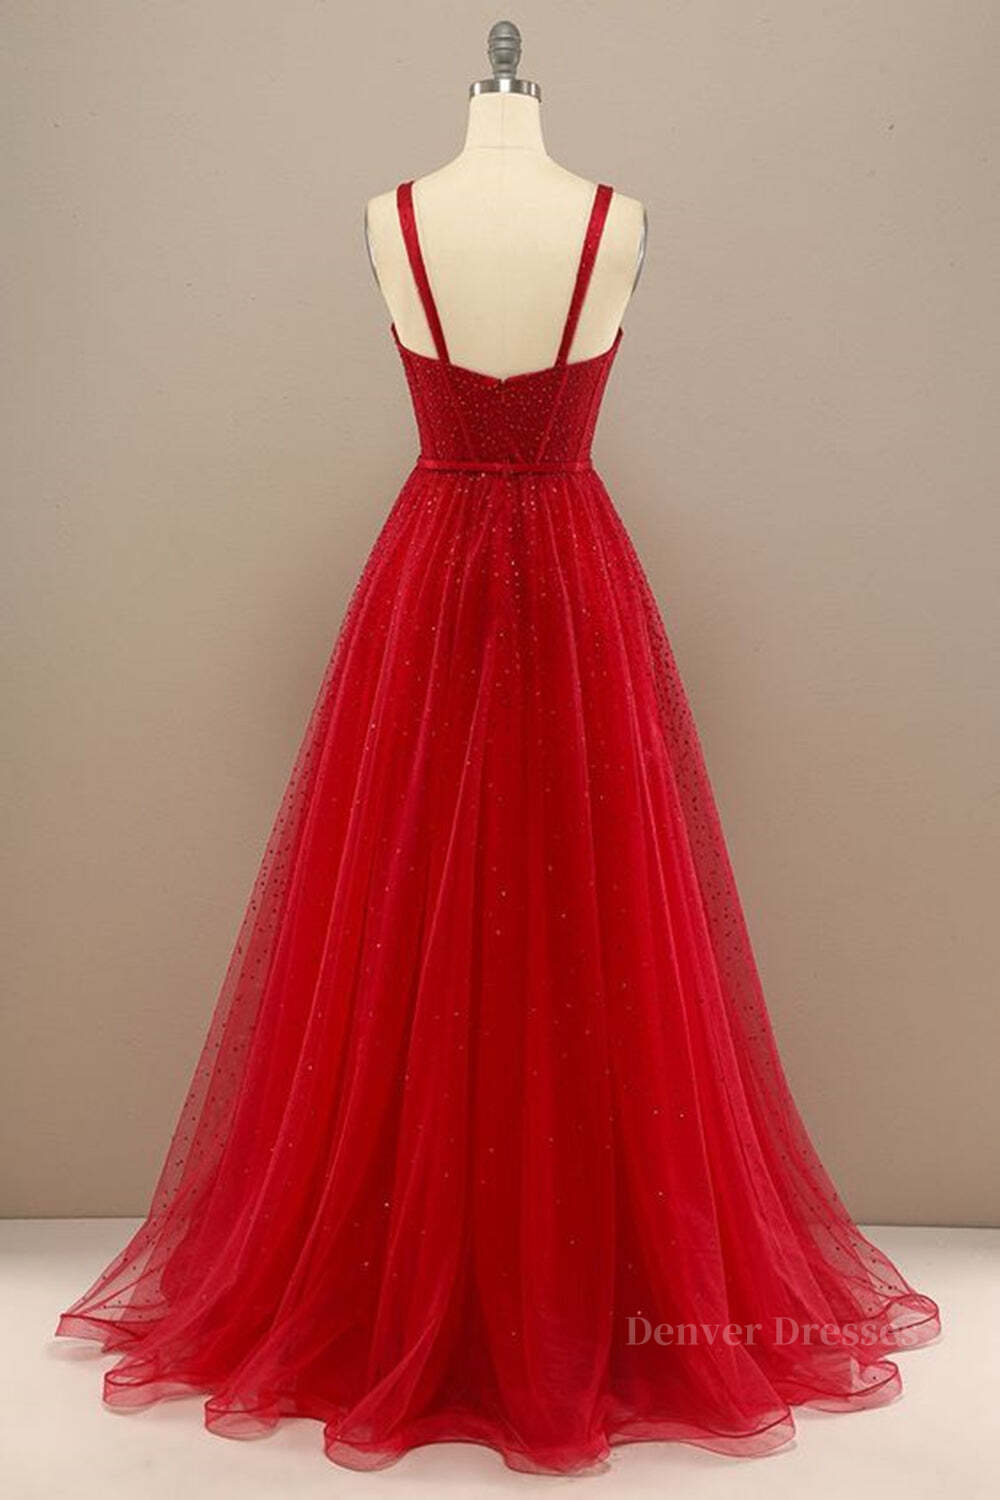 Bridesmaid Dresses Short, Shiny Sweetheart Neck Red Tulle Beaded Long Prom Dresses, Open Back Red Tulle Formal Graduation Evening Dresses